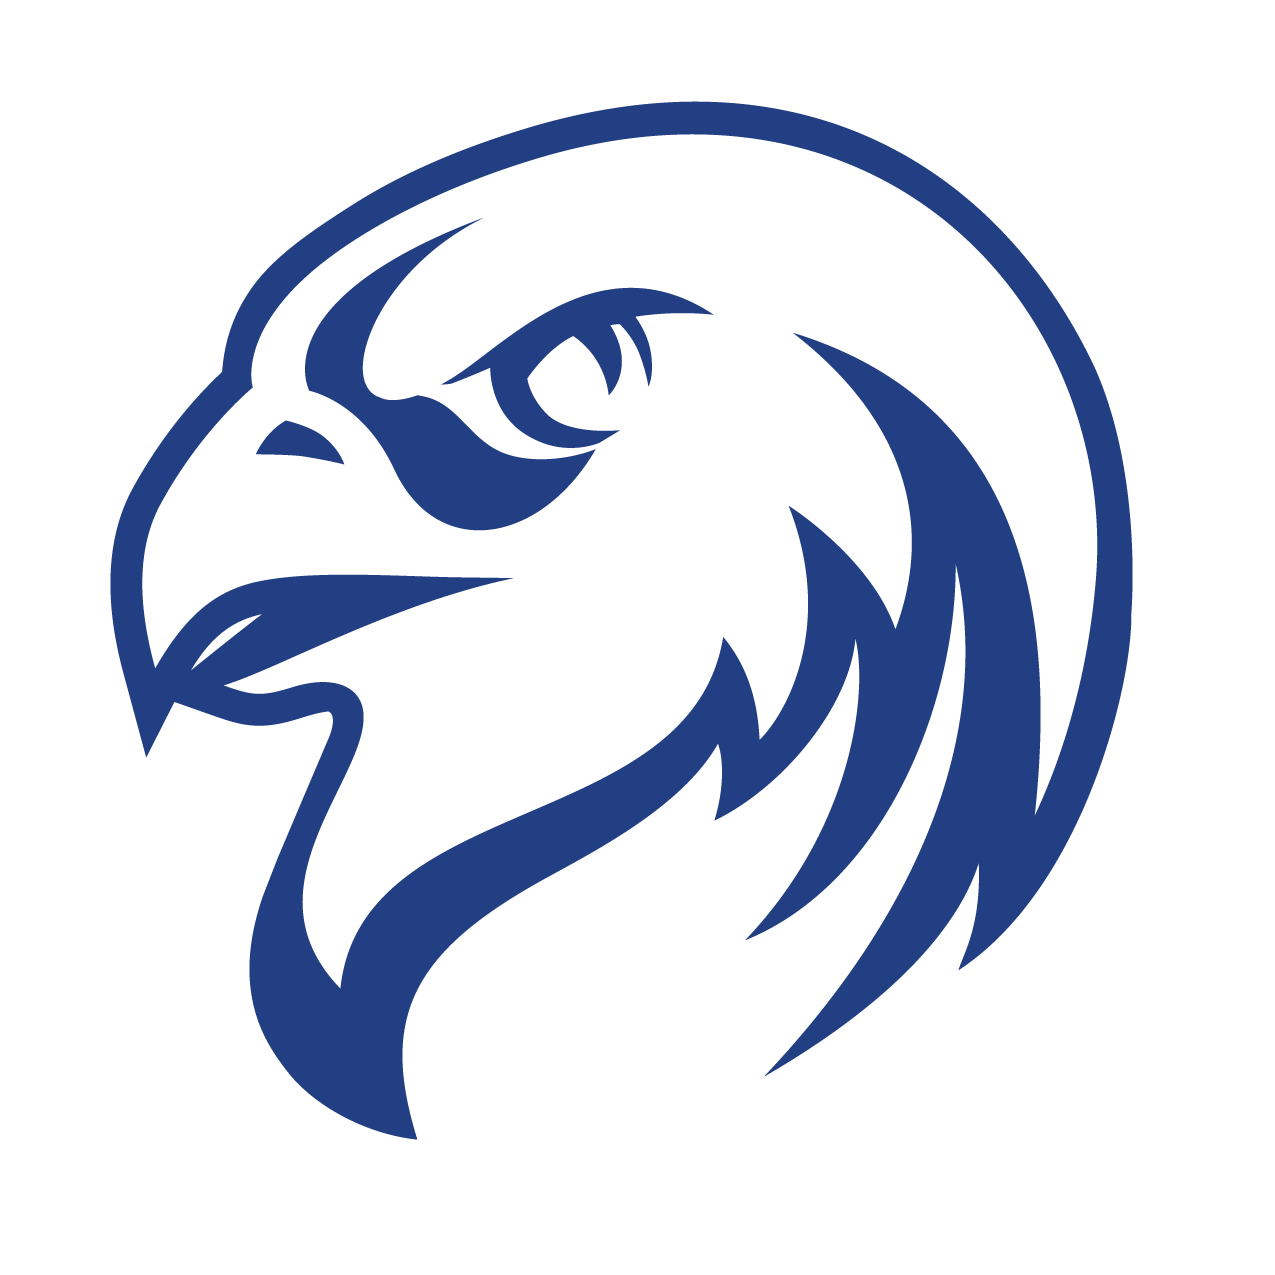 blue falcon meaning army